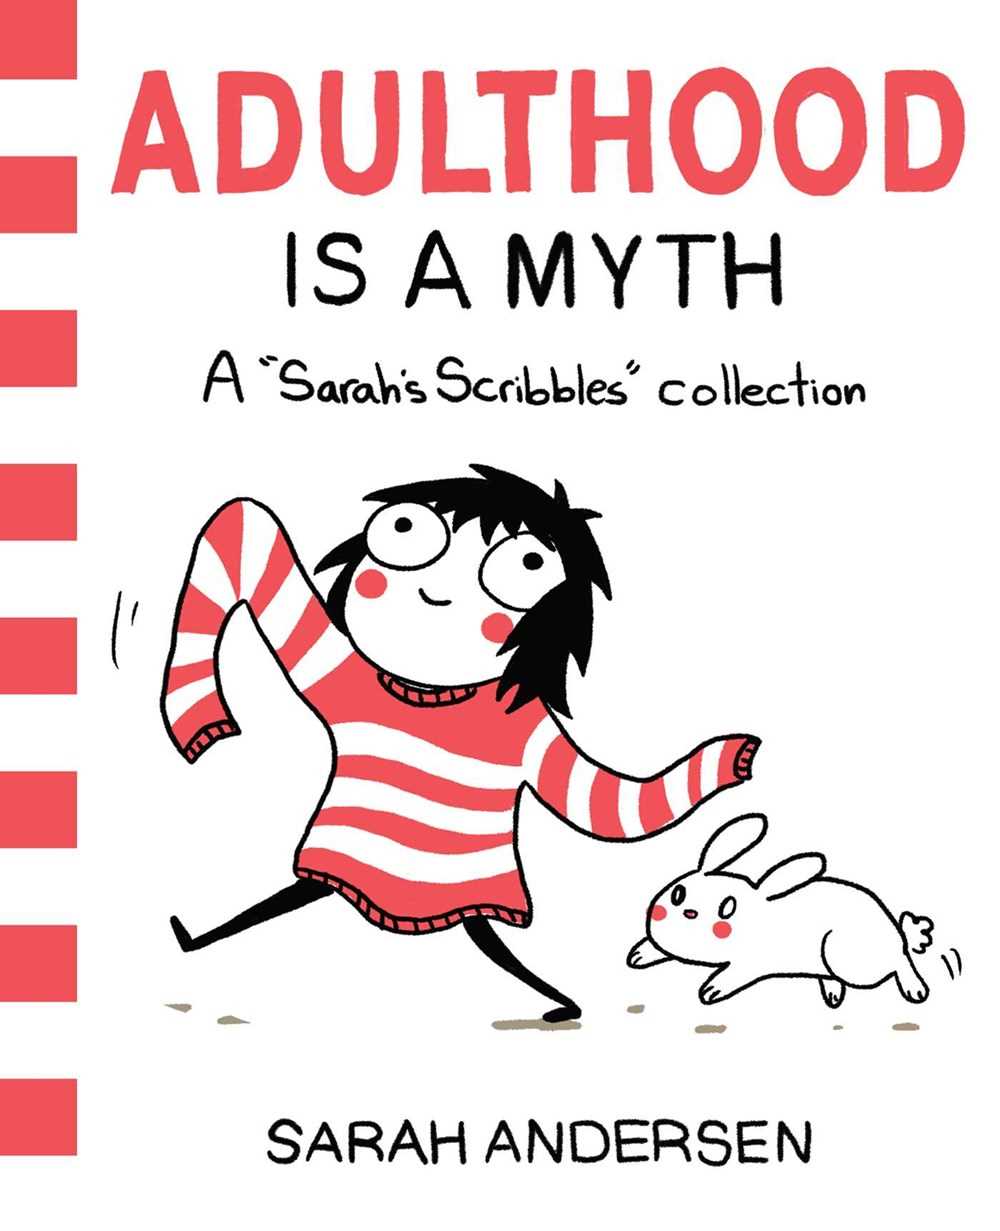 Sarah's Scribbles #01: Adulthood Is a Myth